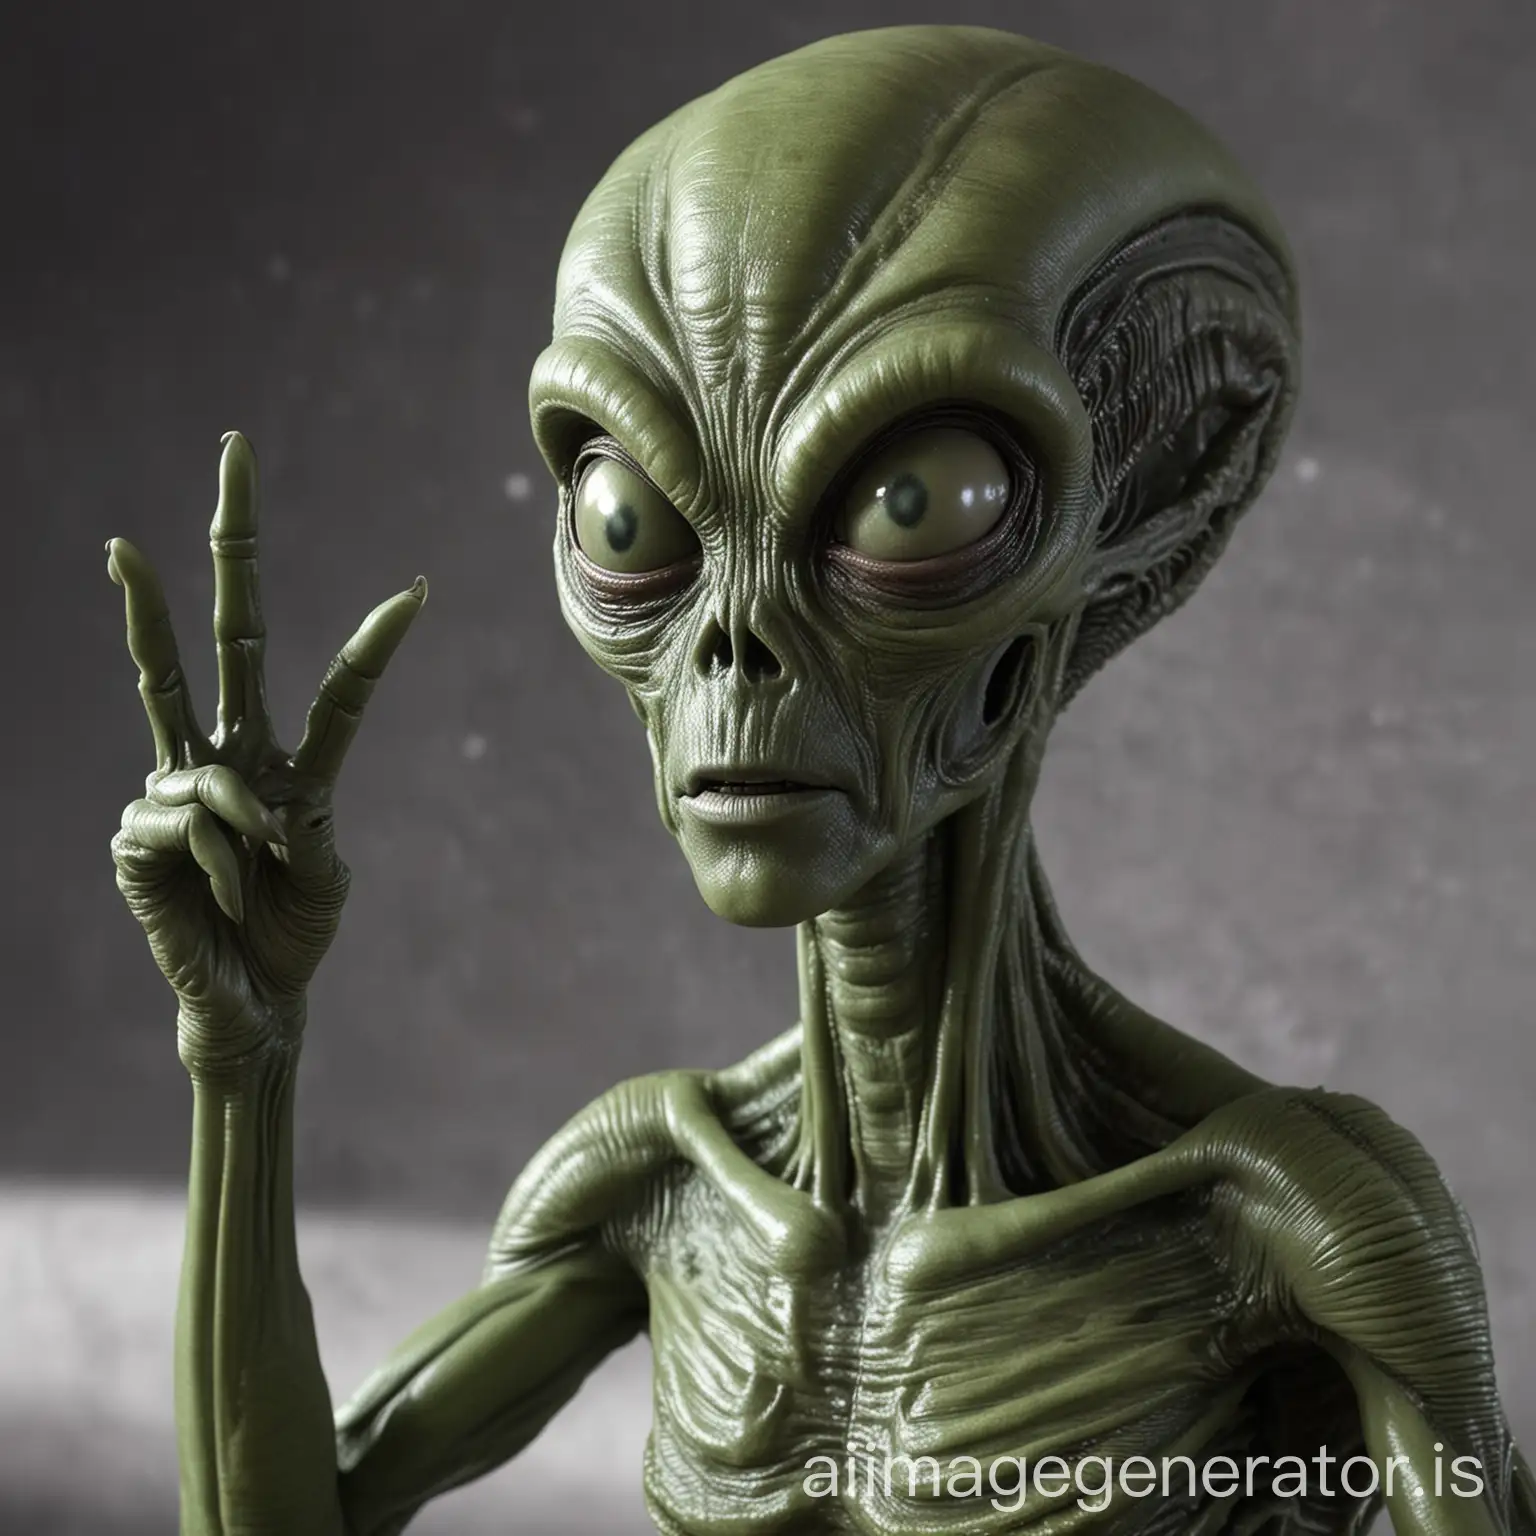 Alien giving out his opinion